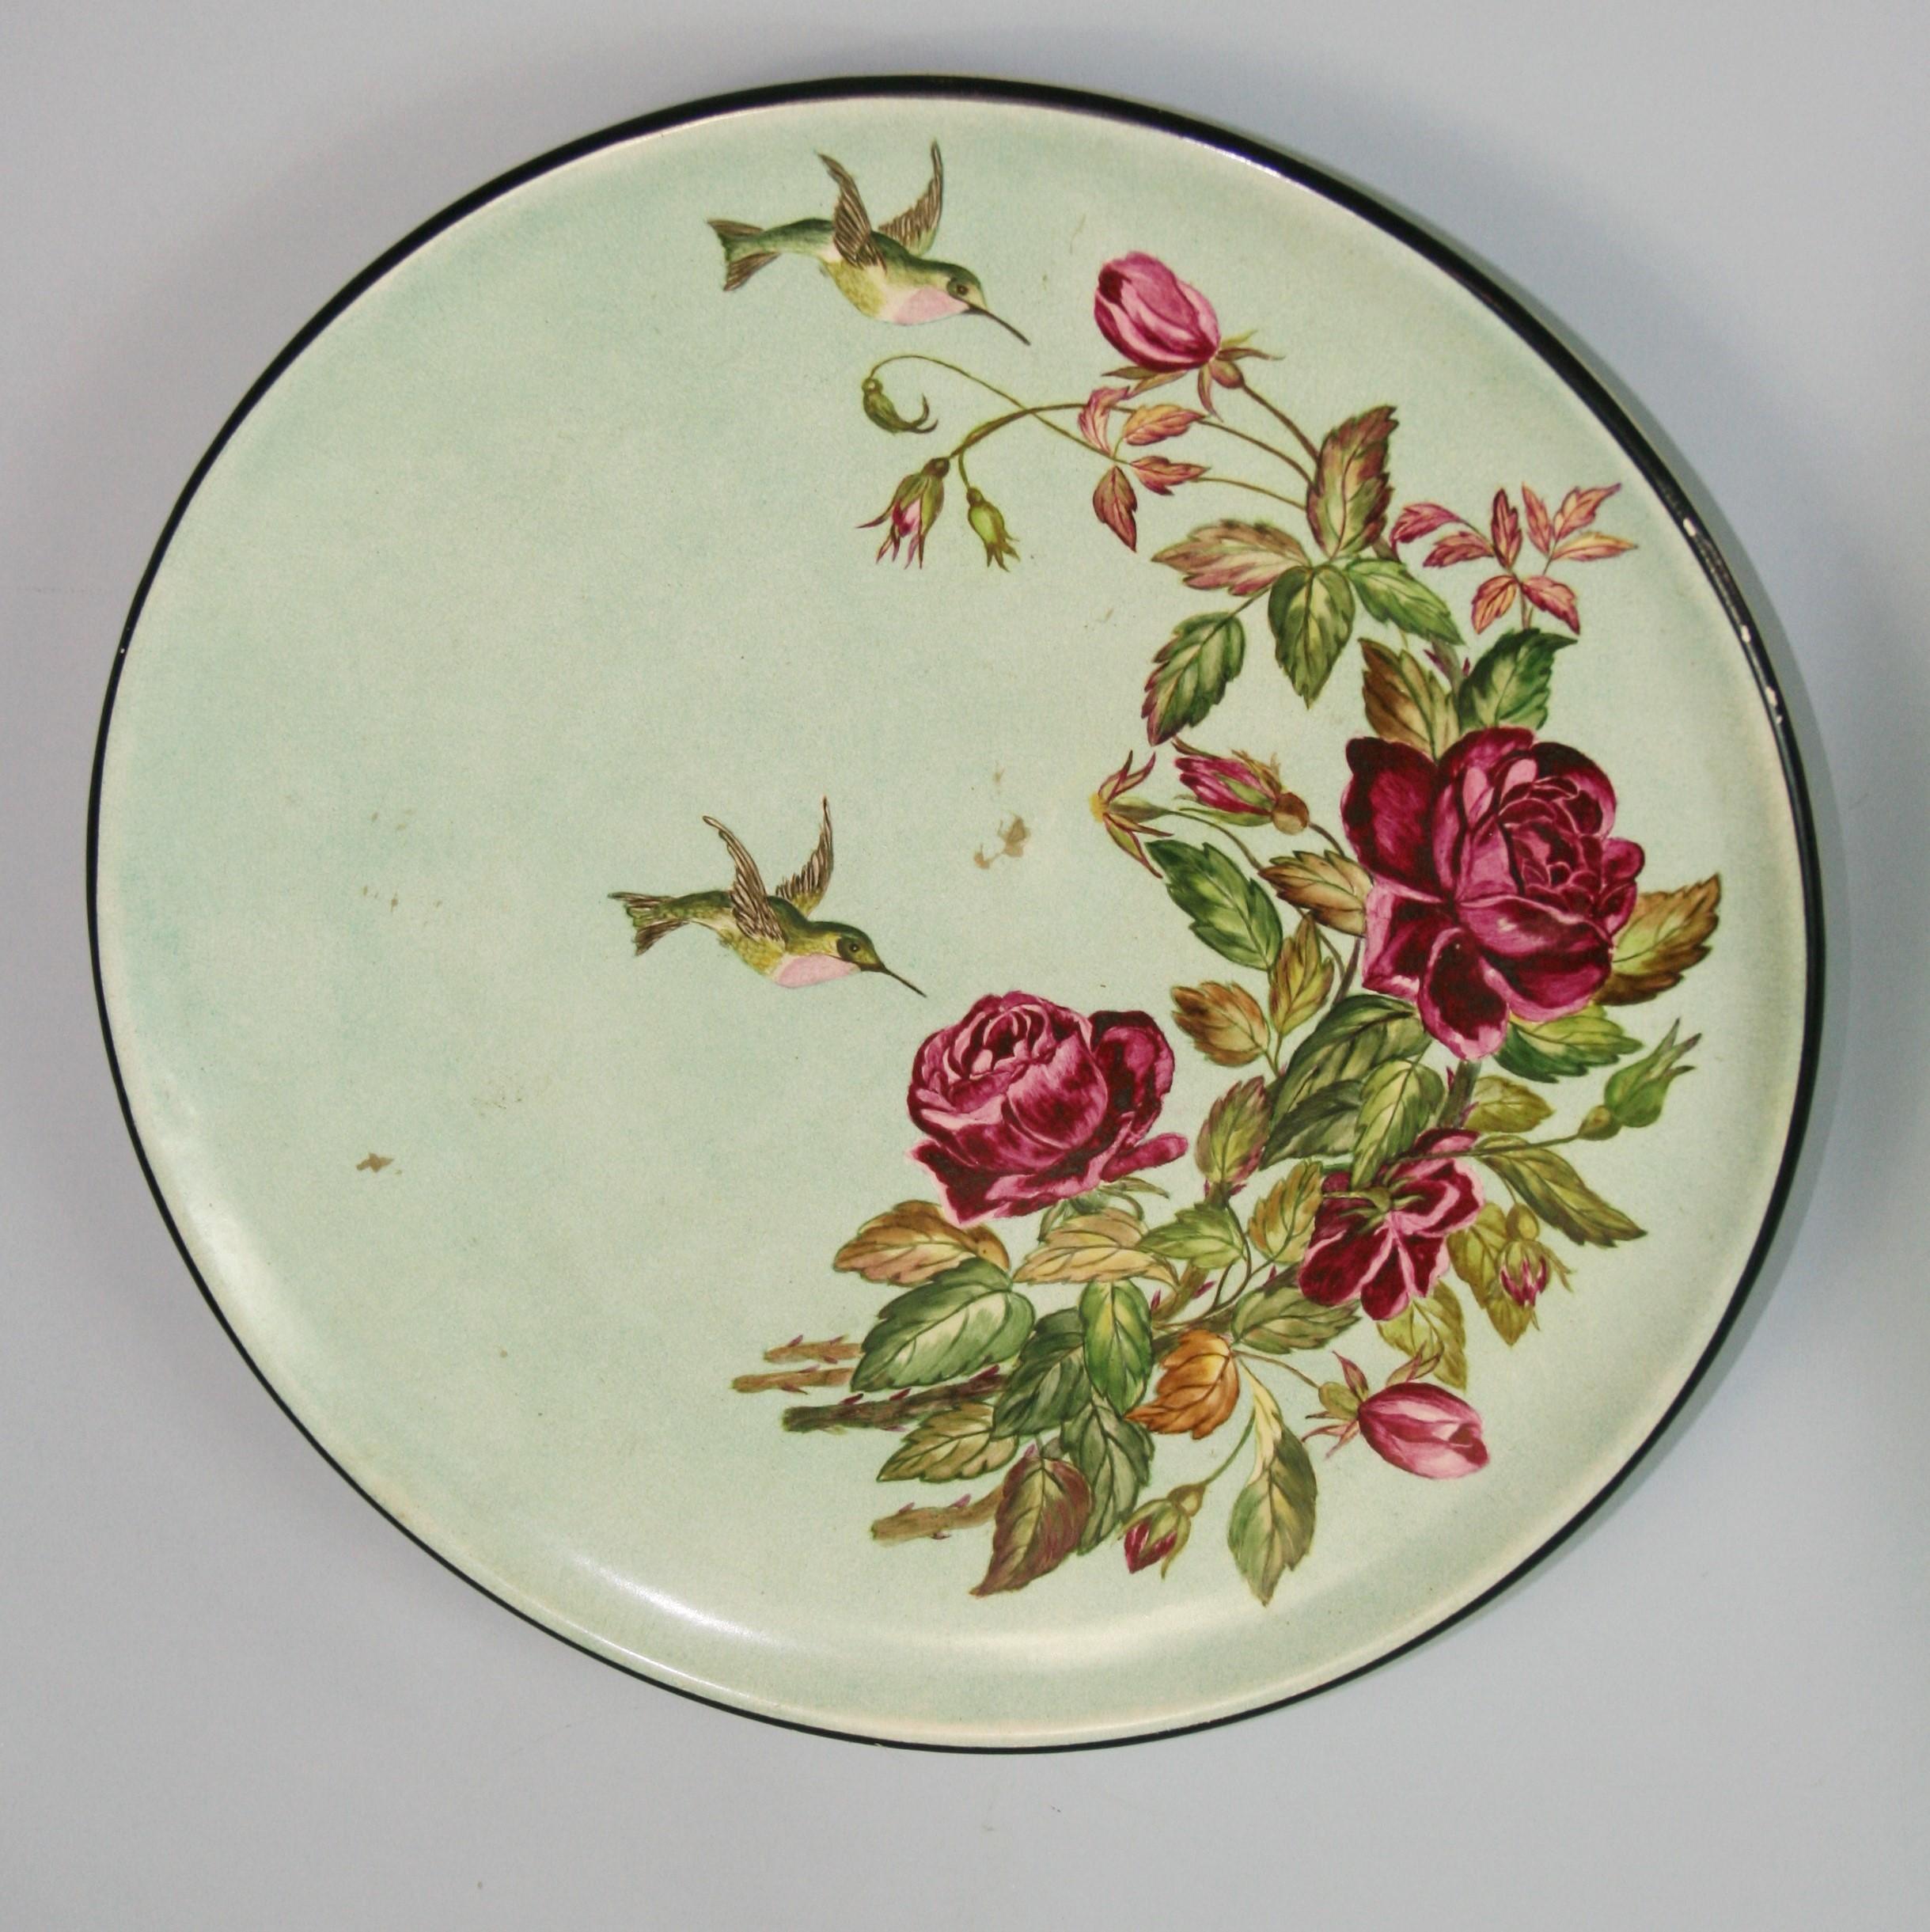 1581 English ceramic charger hand painted with humming birds and roses
Hanging wire on back